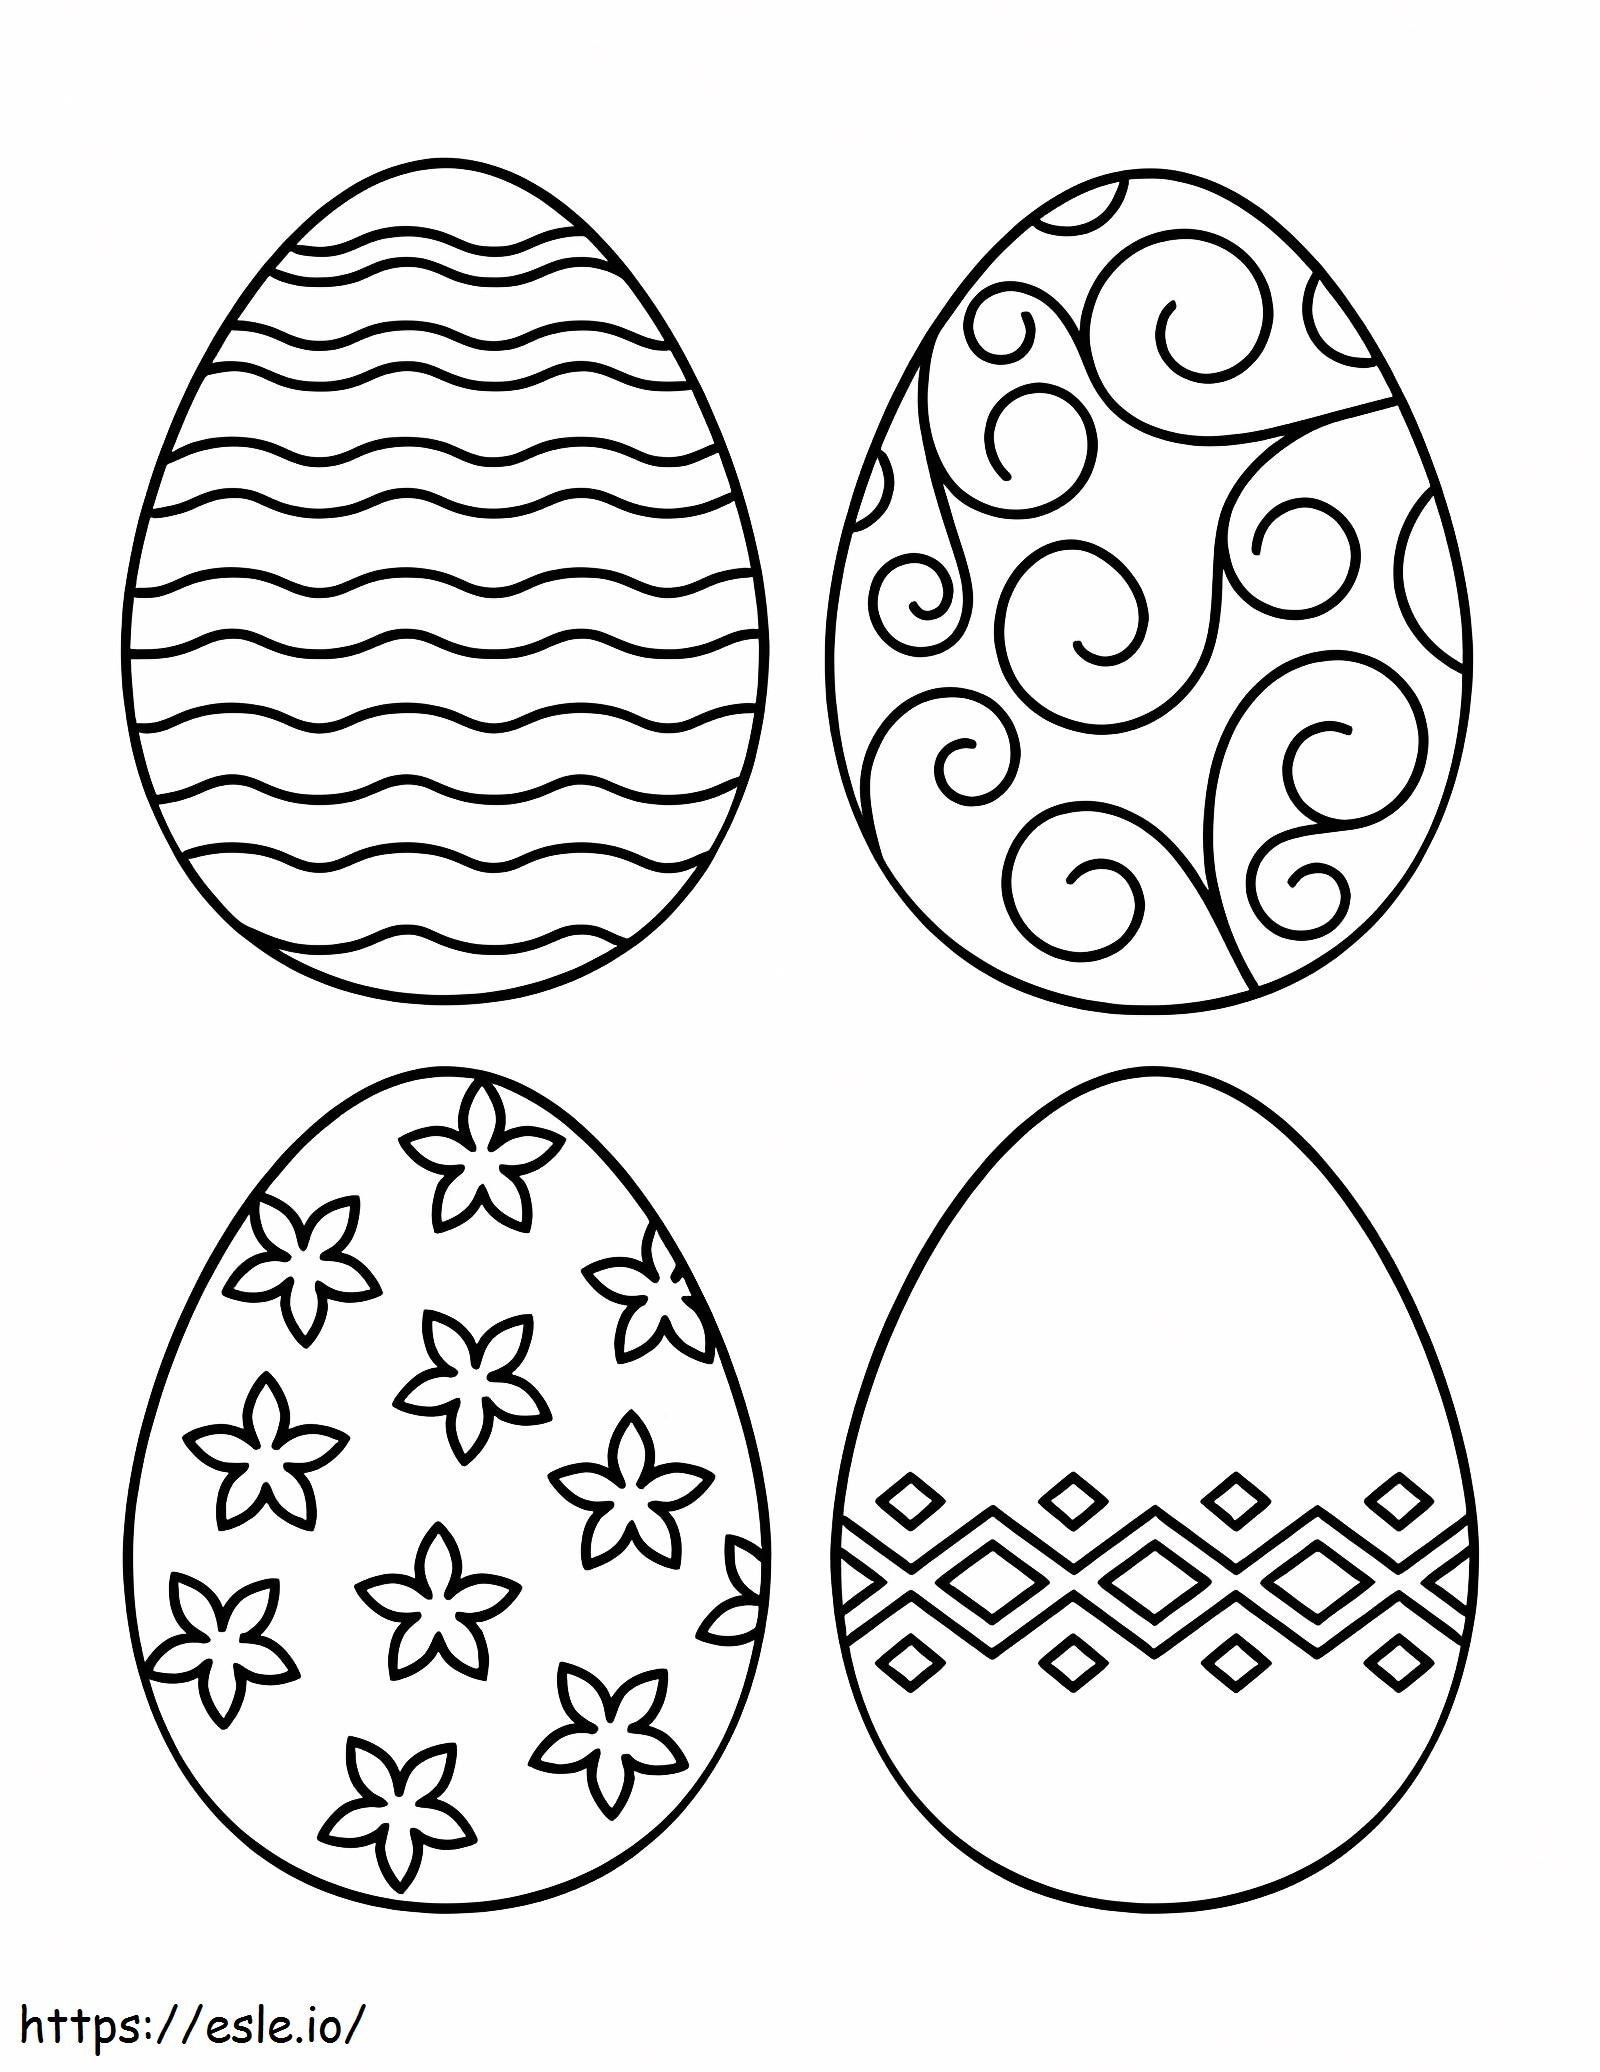 The Egg Is For Adults coloring page